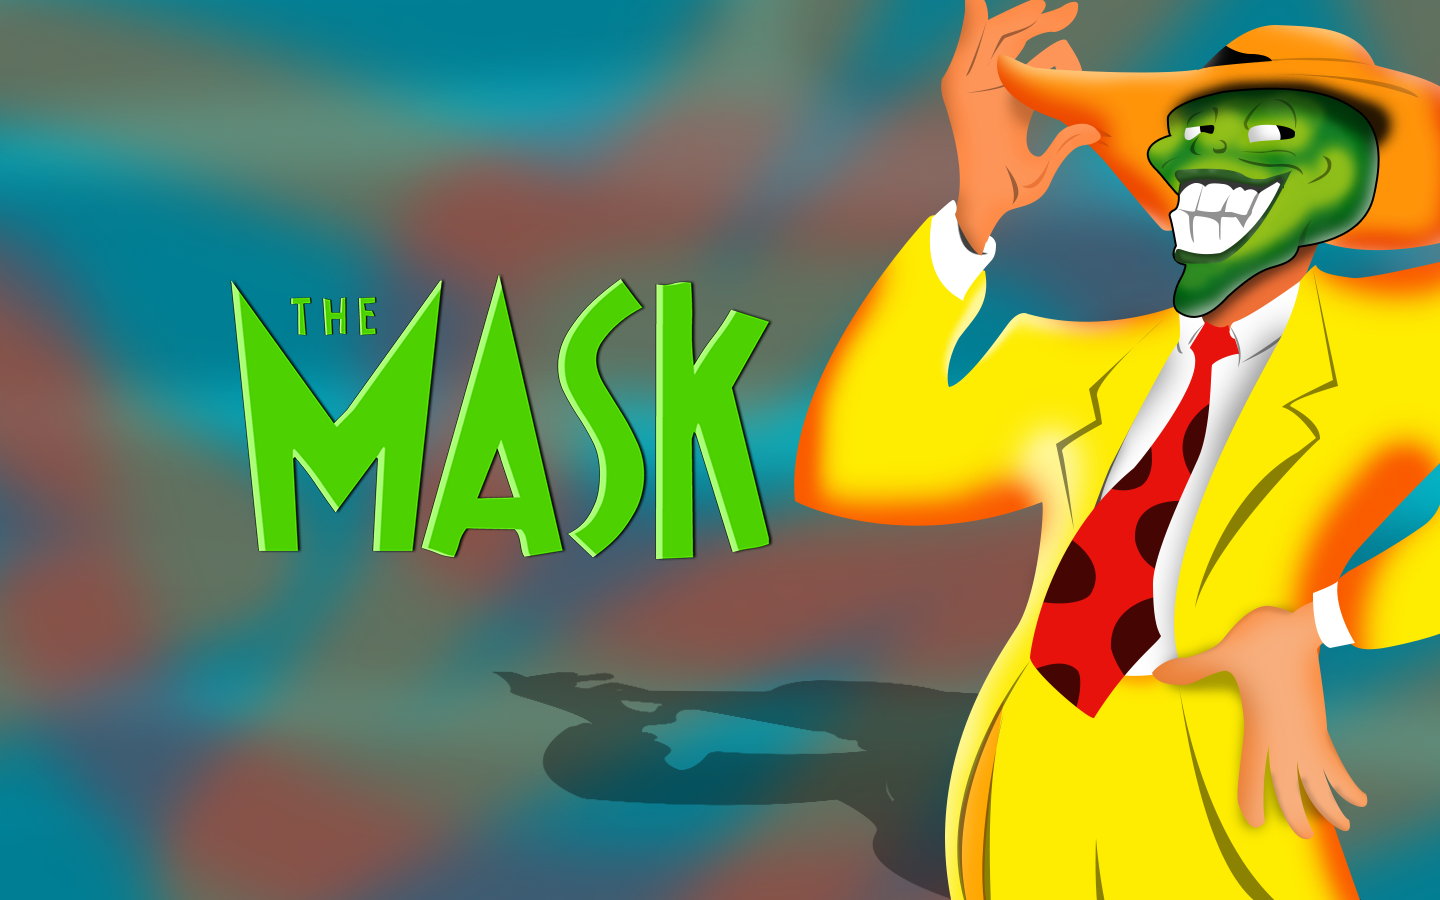 The Mask Mask Platinum Conception Wallpapers 1440x900